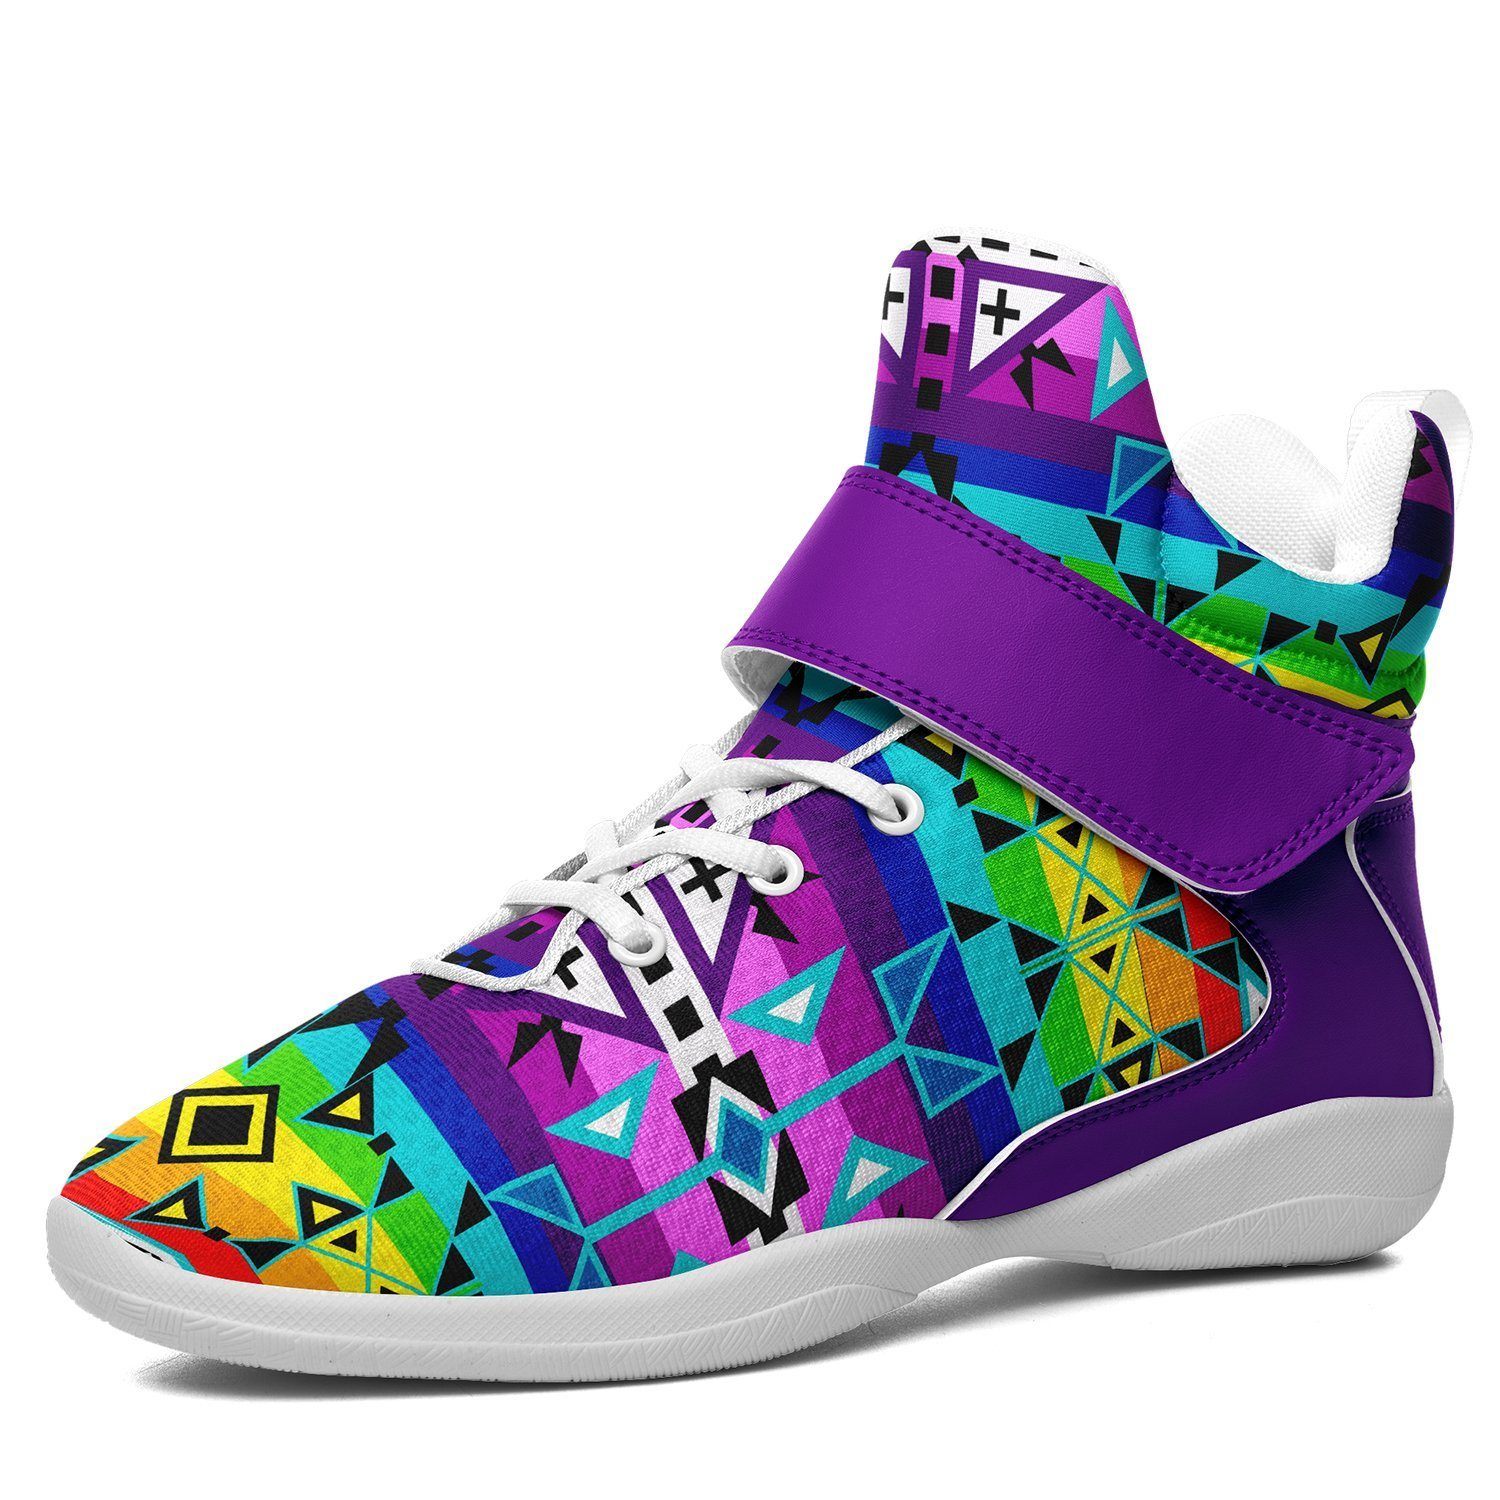 After the Rain Ipottaa Basketball / Sport High Top Shoes - White Sole 49 Dzine US Men 7 / EUR 40 White Sole with Indigo Strap 